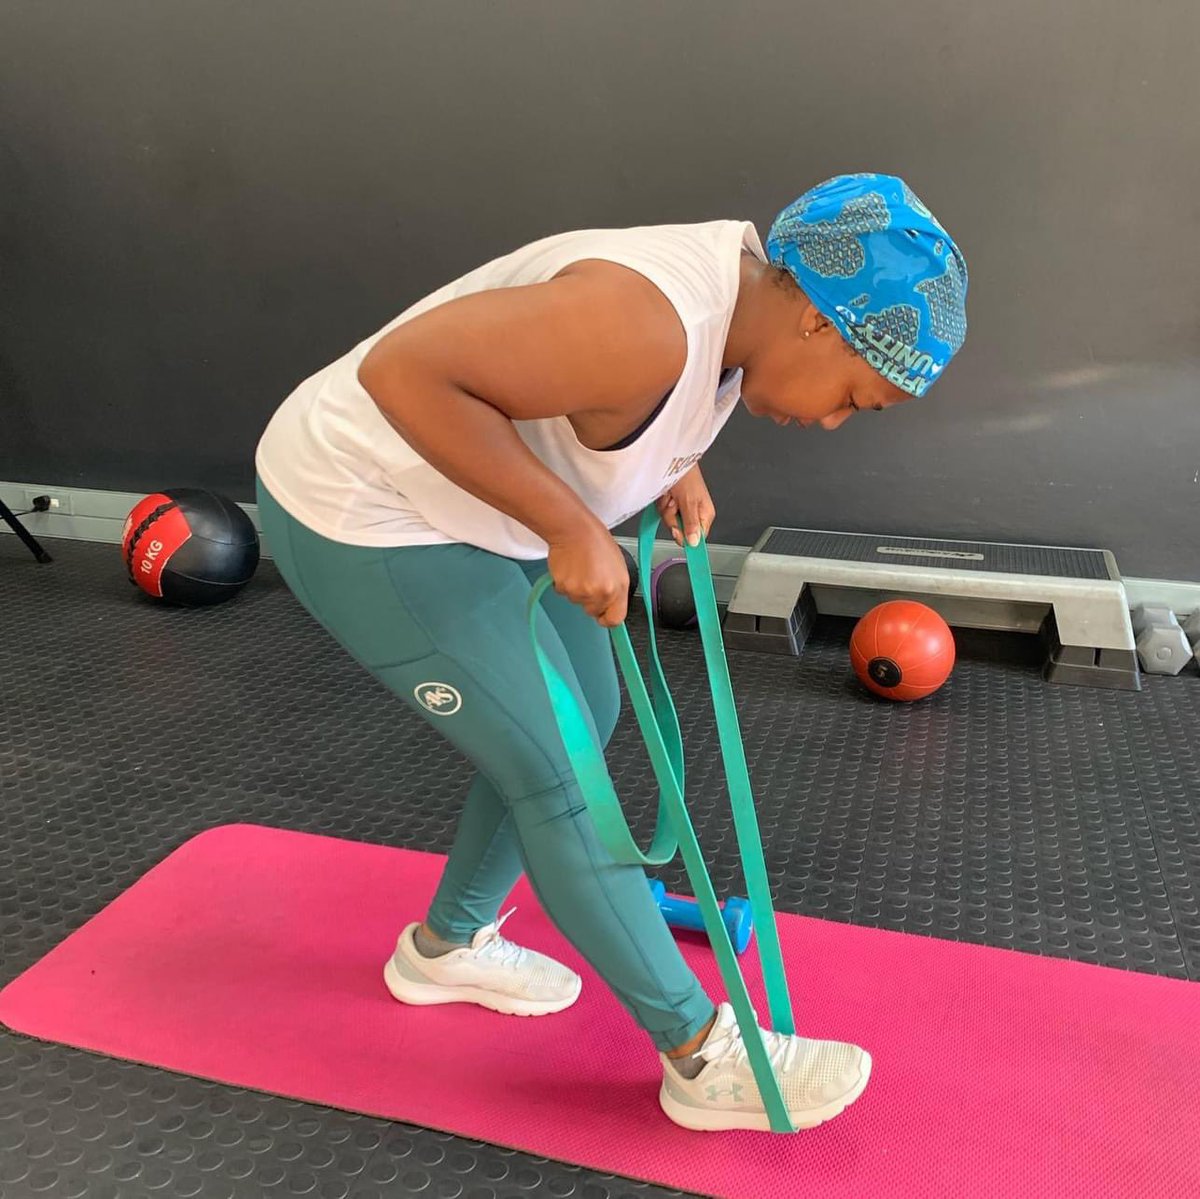 Why stretching is important?

Why stretching is important. Stretching keeps the muscles flexible, strong, and healthy joints .

Don’t forget to stretch today 🦵🏾

#Avsfitness #TeamAvs  #BEBETTER